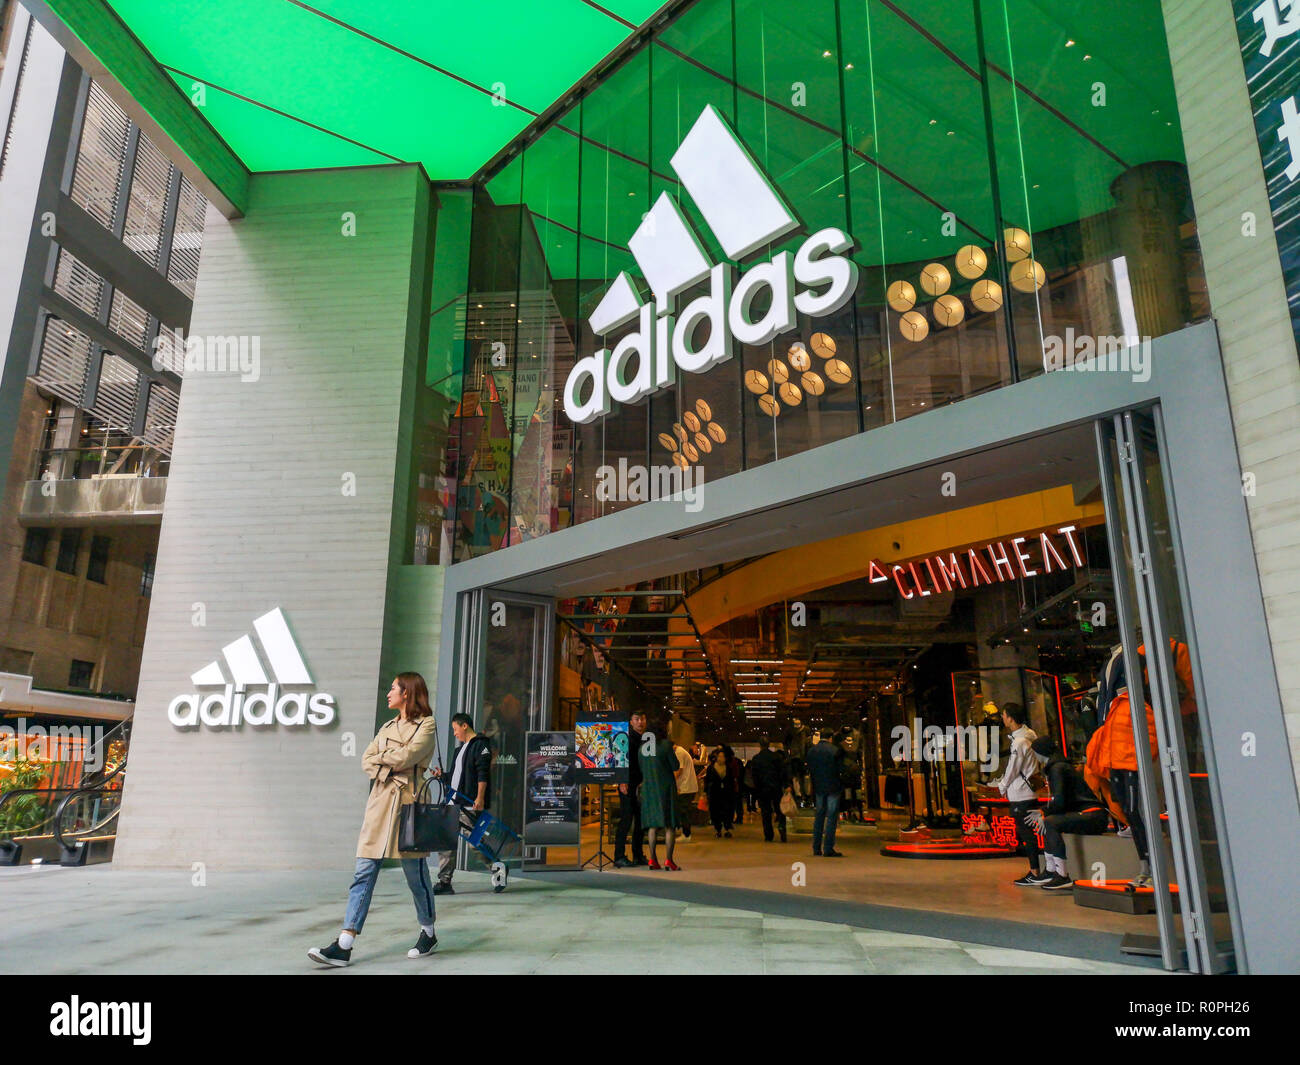 adidas store opening hours